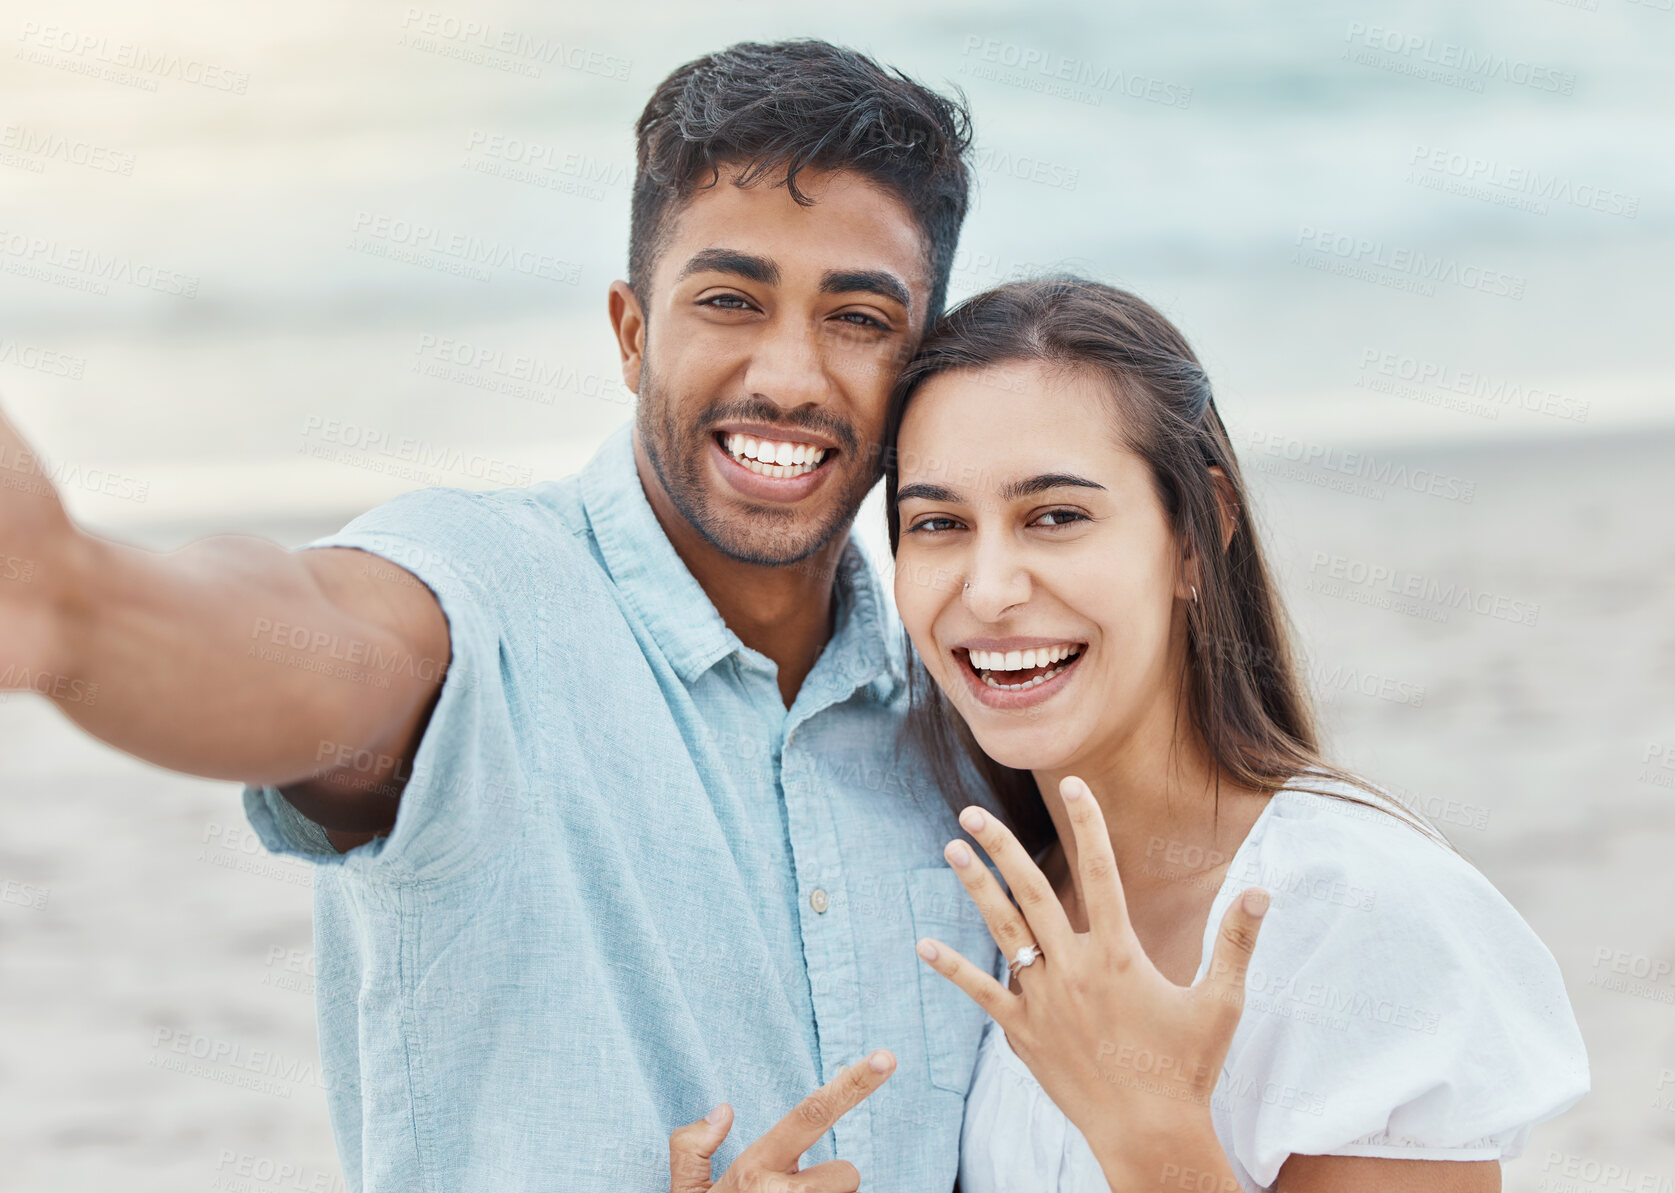 Buy stock photo Couple selfie, engagement proposal or wedding ring at the beach, jewelry or engaged announcement. Romance face portrait, love and commitment of man and woman by the ocean celebrating with a smile.


